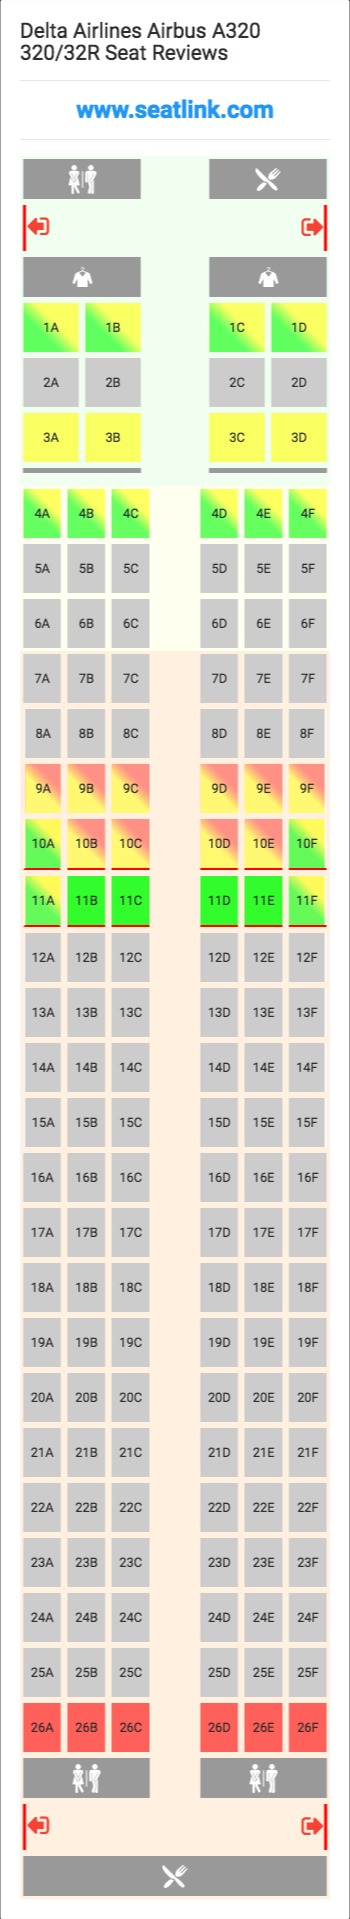 Delta Airlines Airbus A320 320/32R (320) Seat Map